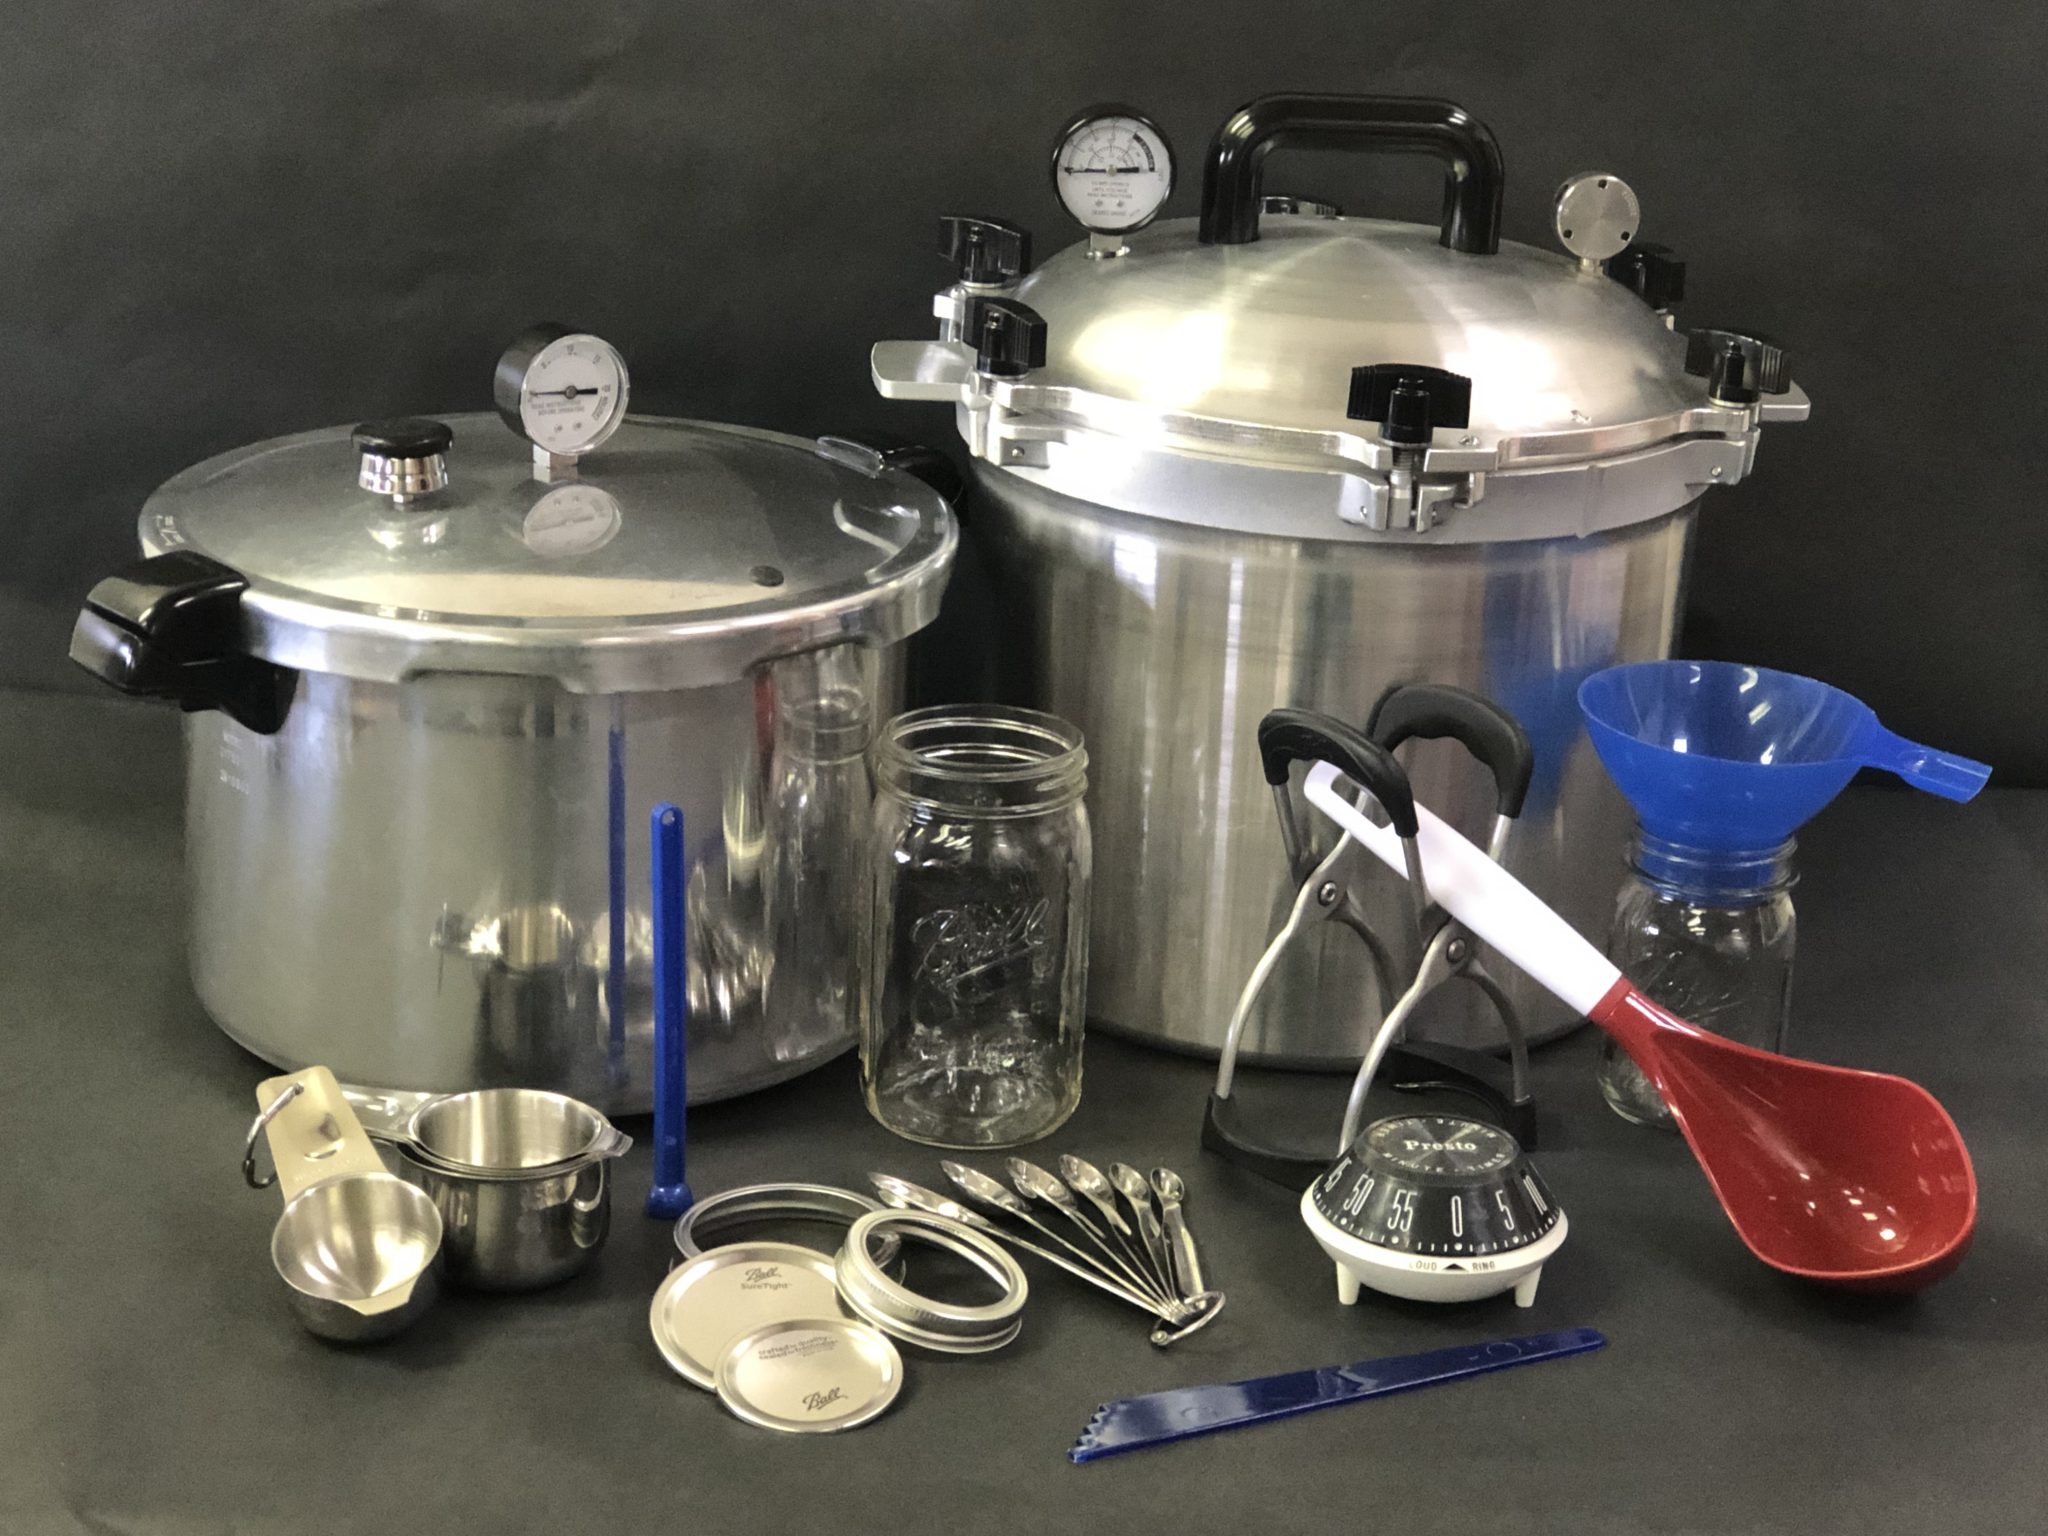 Do I Really Need a Pressure Canner?